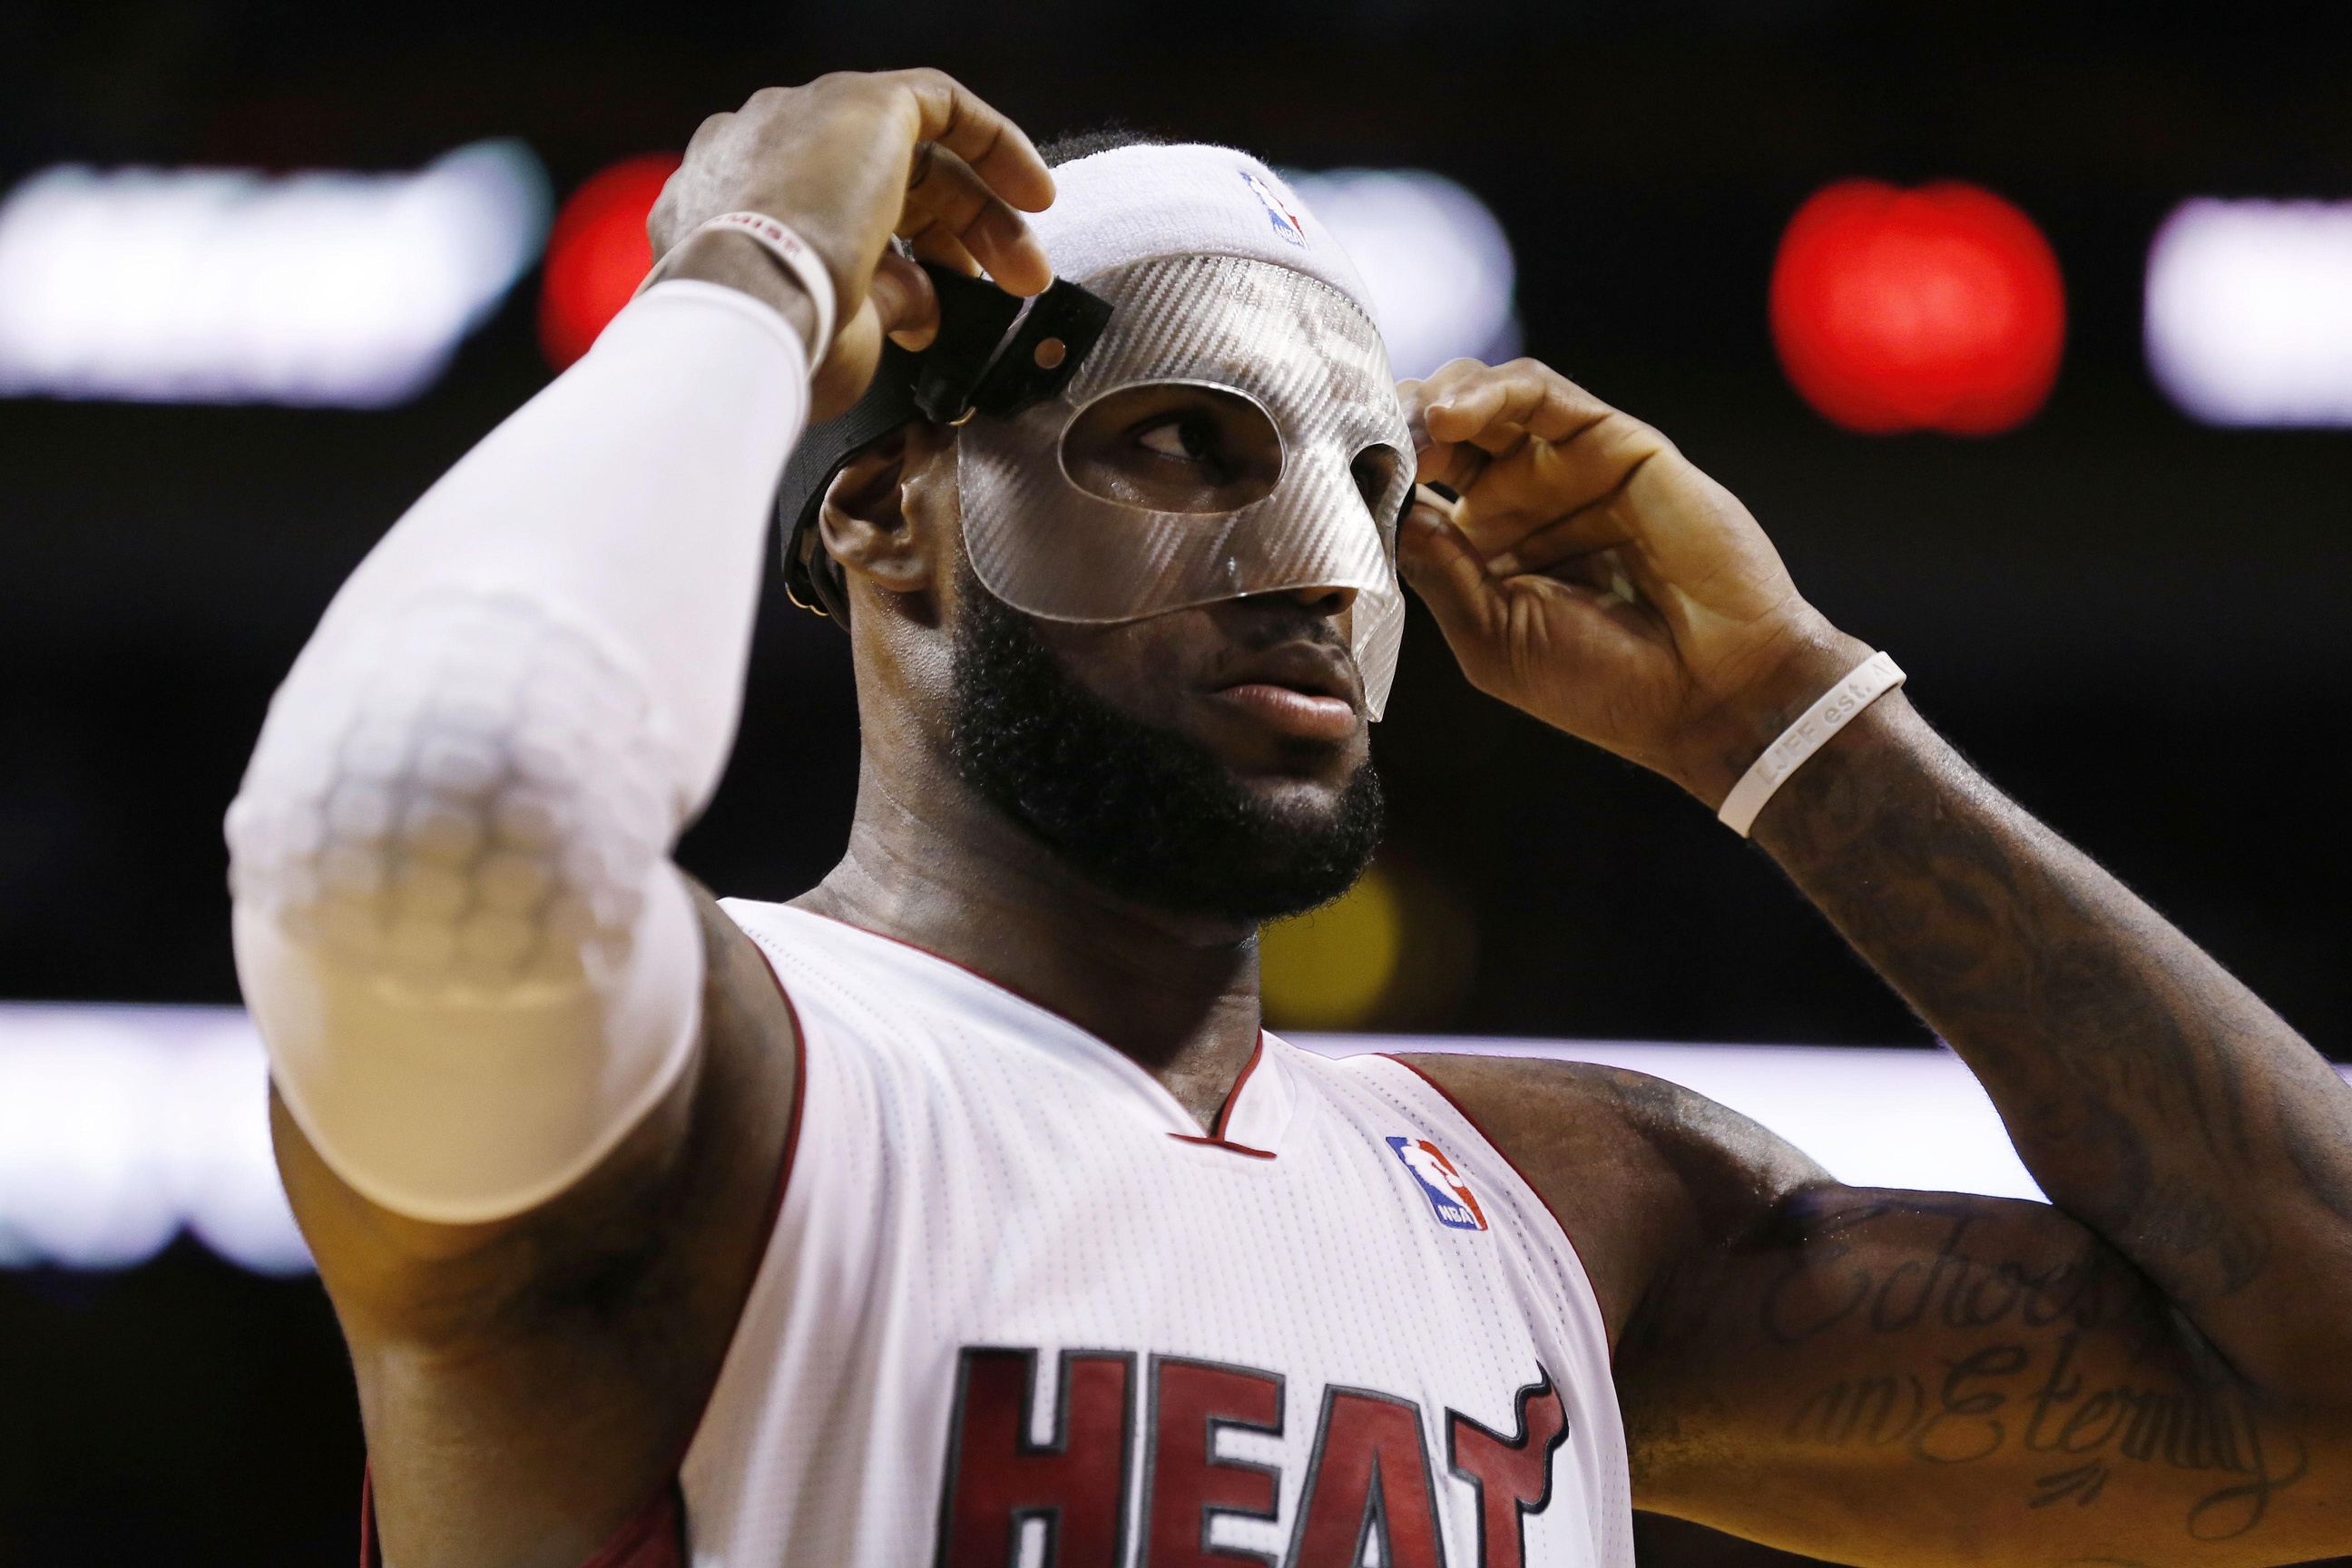 Video Shortens LeBron James' 61-Point Game Down To Five Minutes ...